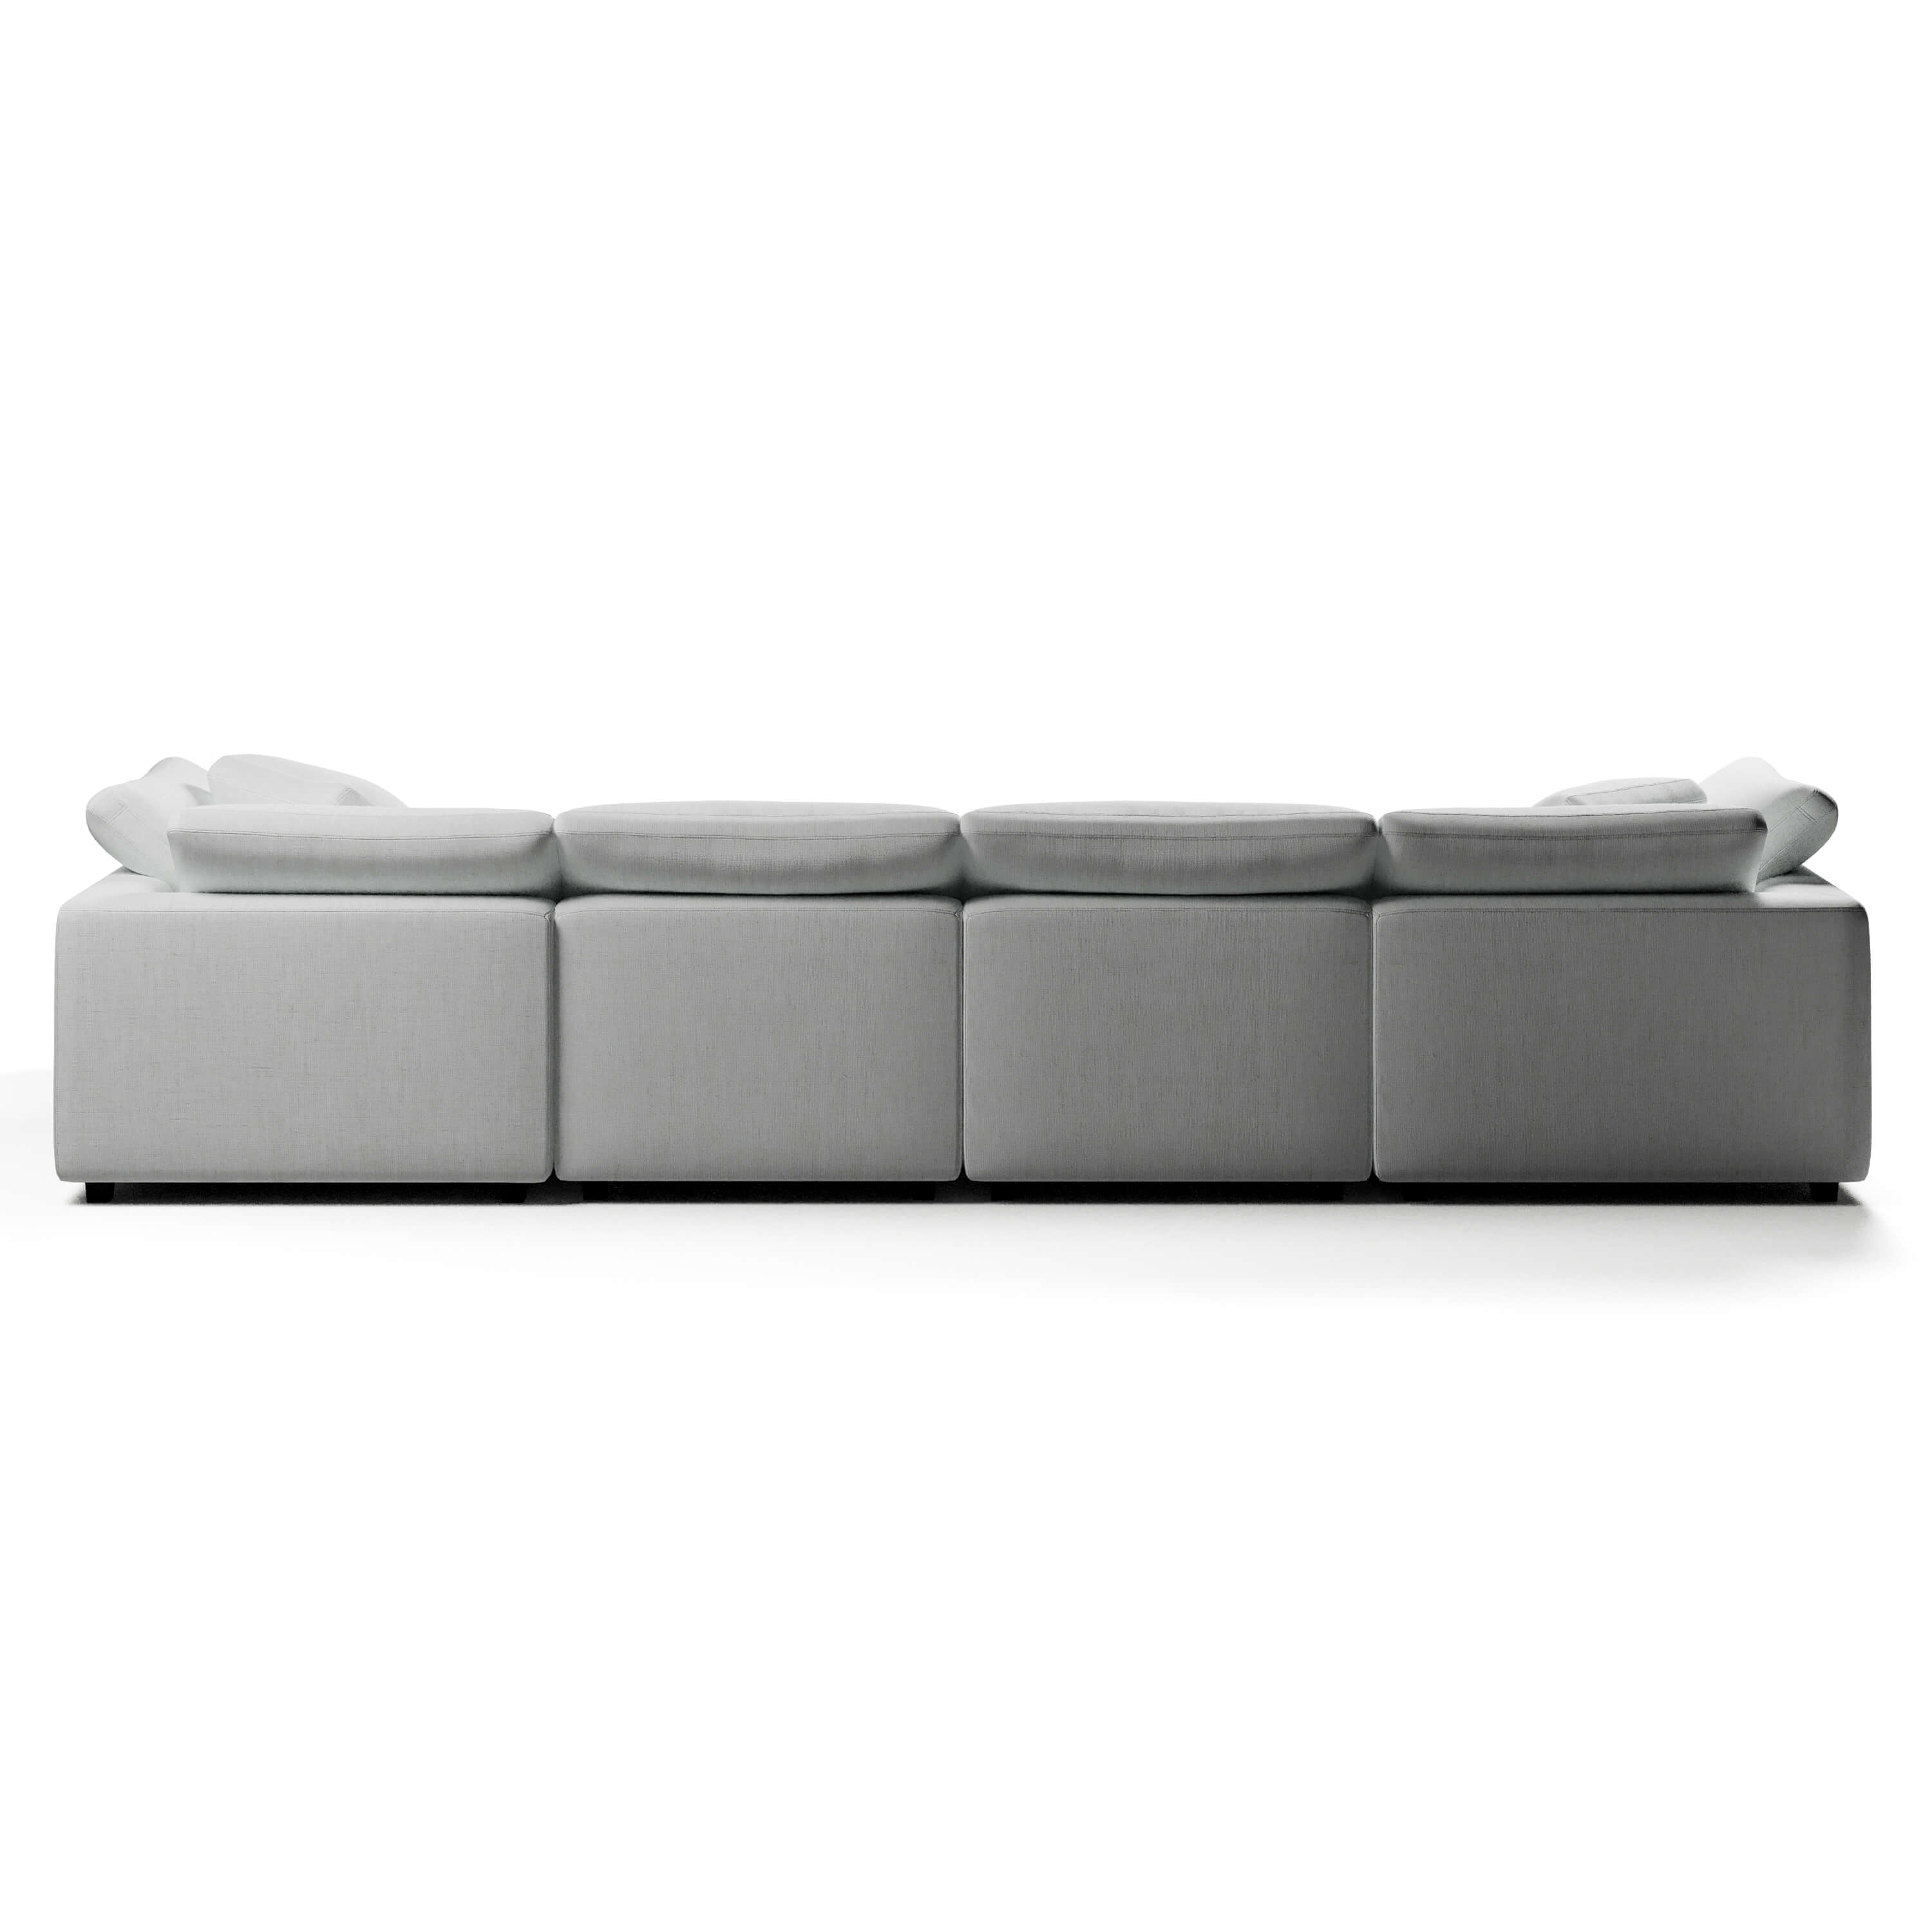 Comfy Modular Sofa - 4-Seater Chaise Sectional - Right Hand Facing